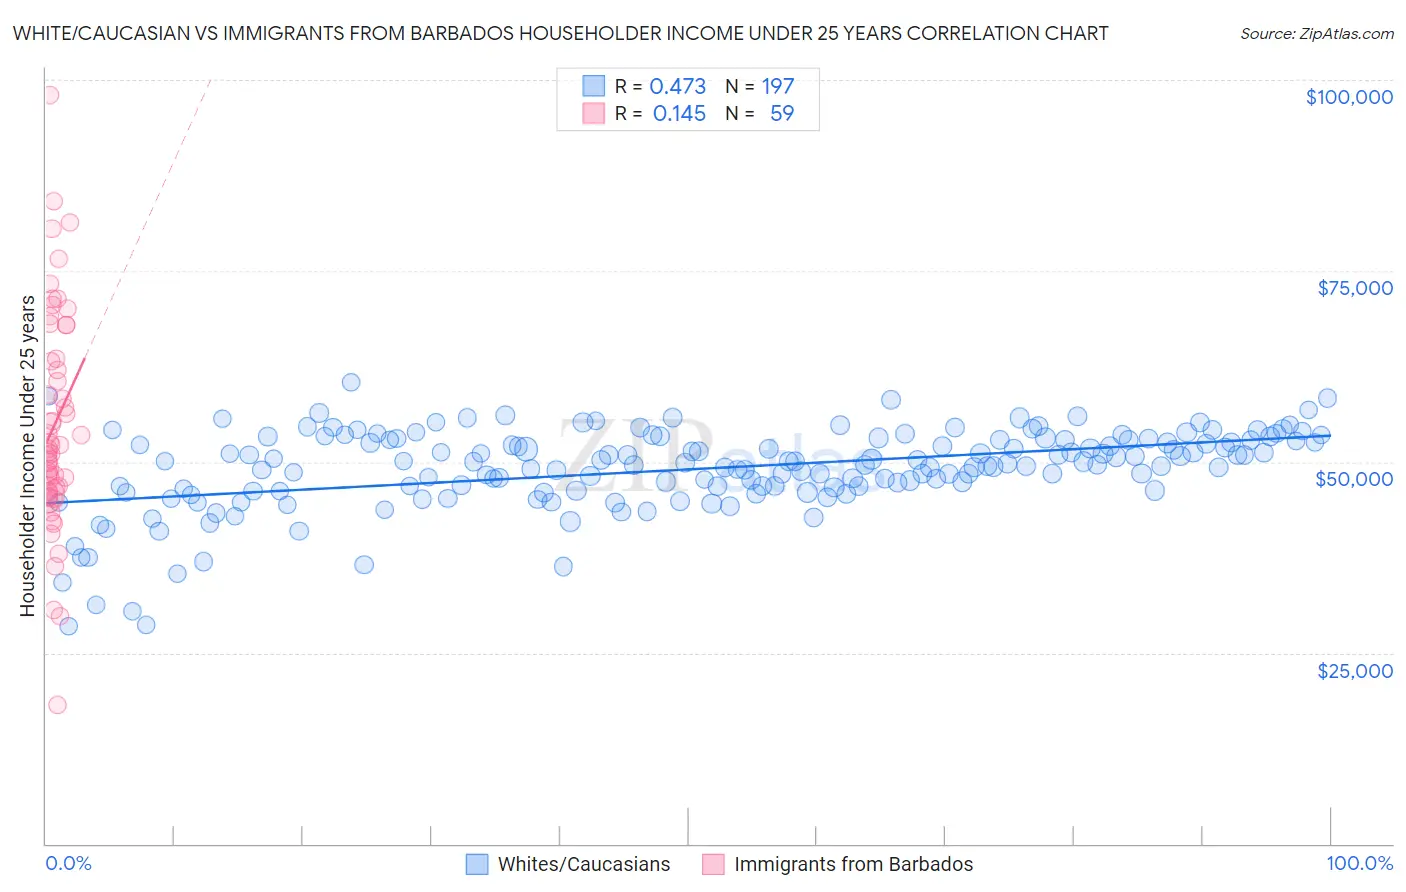 White/Caucasian vs Immigrants from Barbados Householder Income Under 25 years